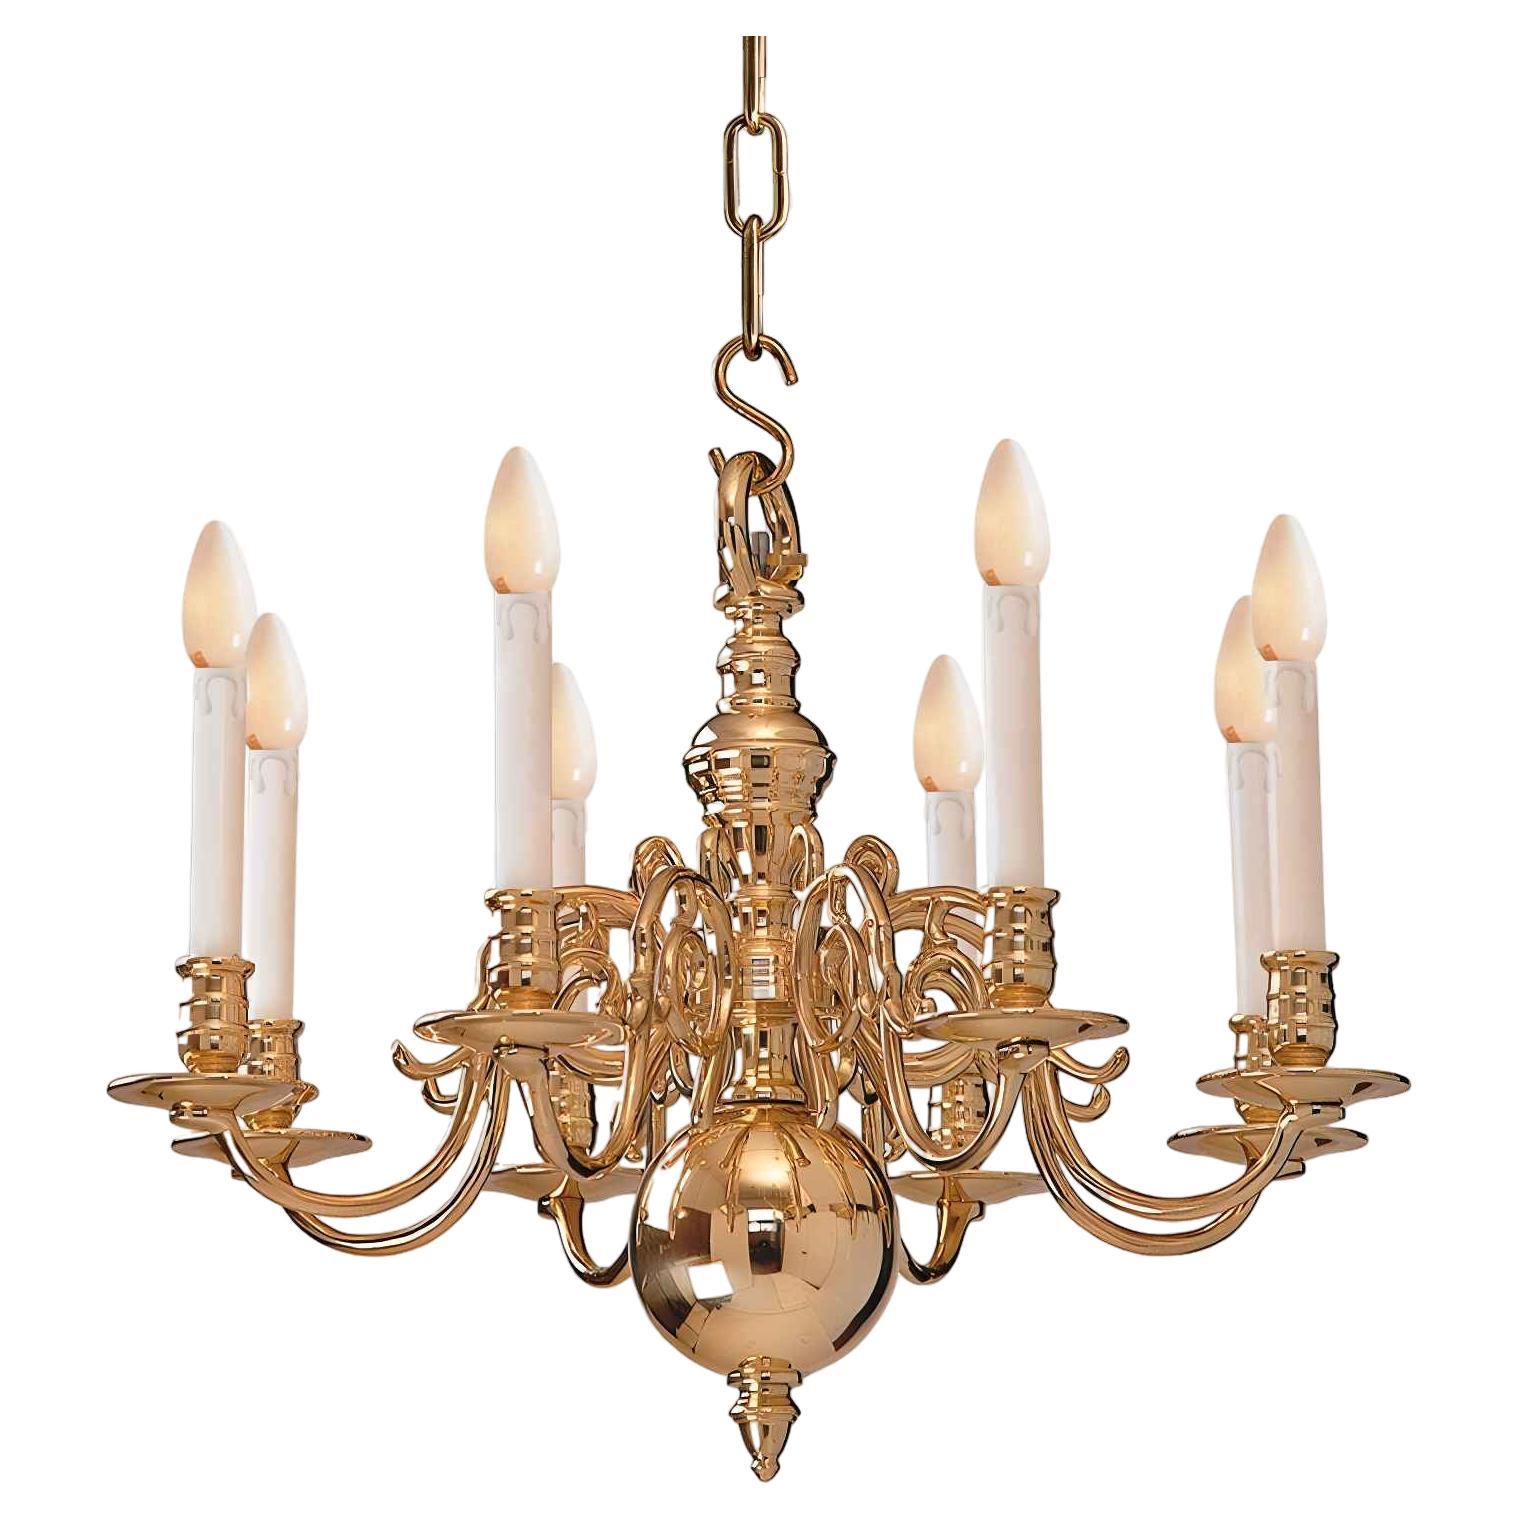 1 Tier 17th Century Electric Model Dutch Brass Chandelier with 8 Lights H60xW66 For Sale